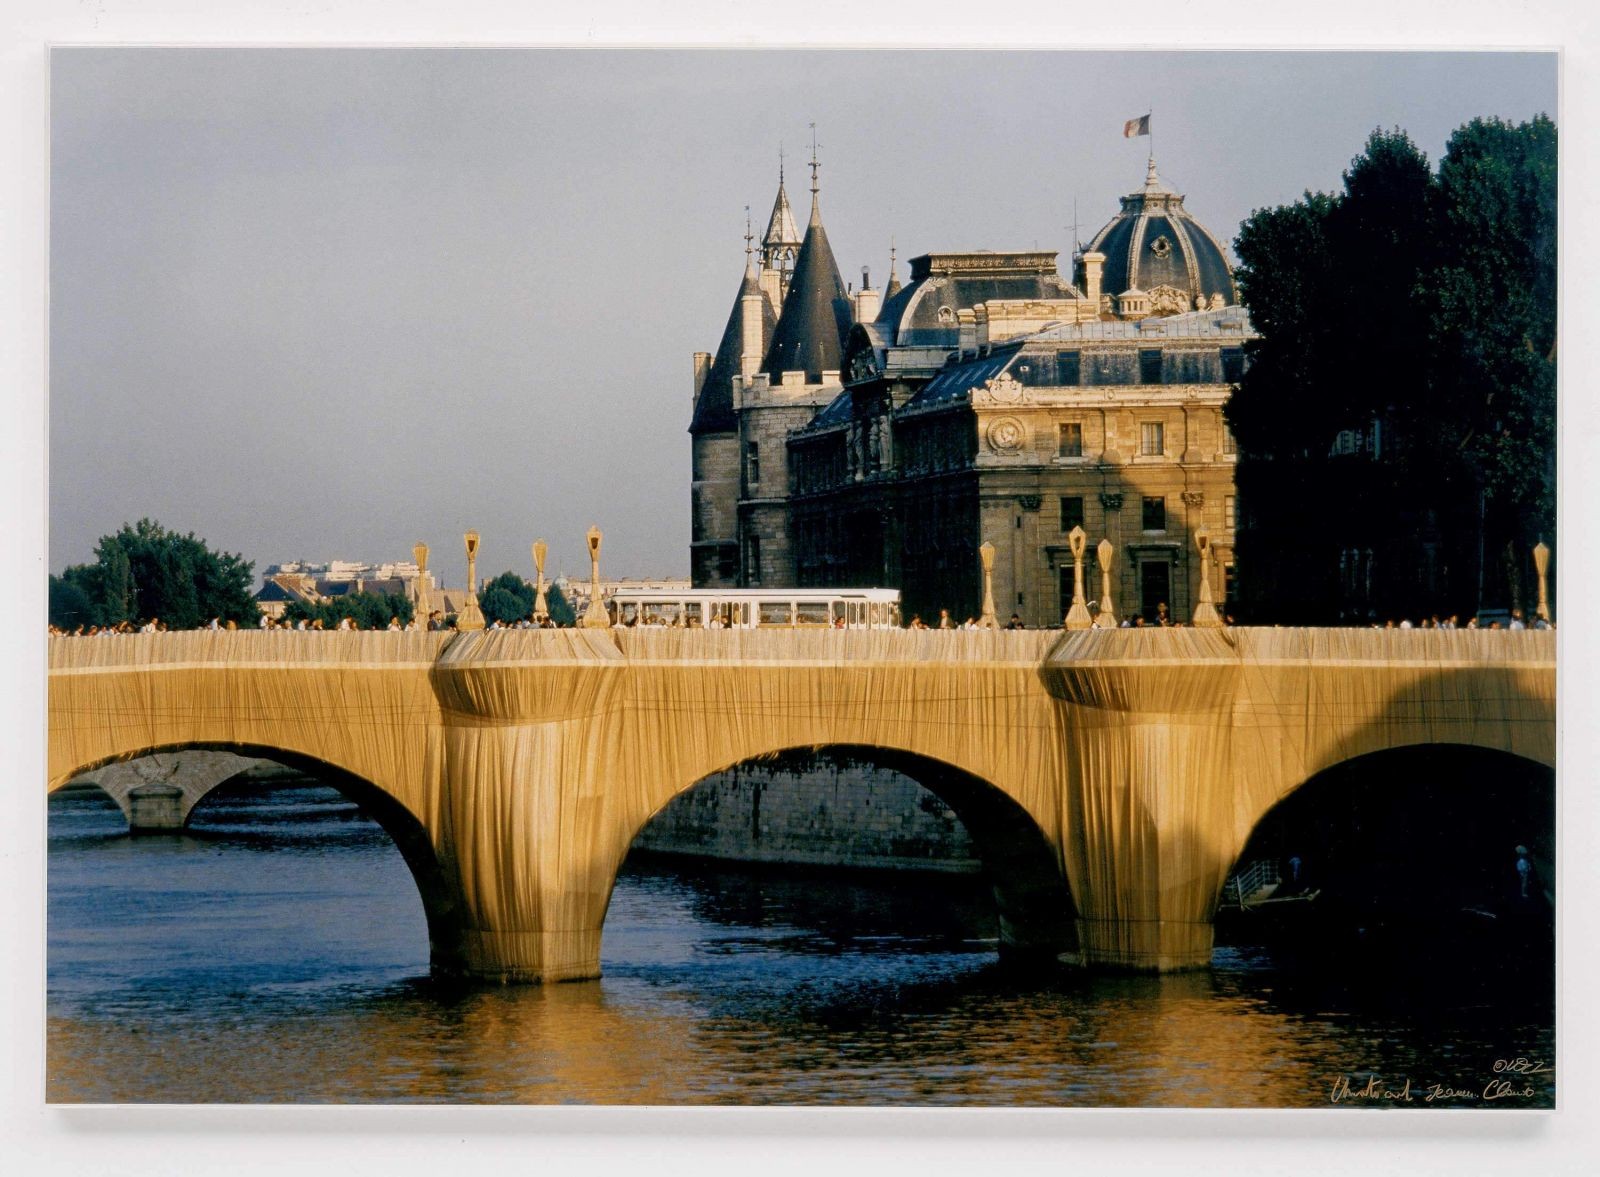 The Pont Neuf Wrapped, Paris 1975-85
1985
Photographie de Wolfgang Volz
70 x 100 cm
Collection Würth, Inv. 2801
Crédit : Wolfgang Volz – © Christo